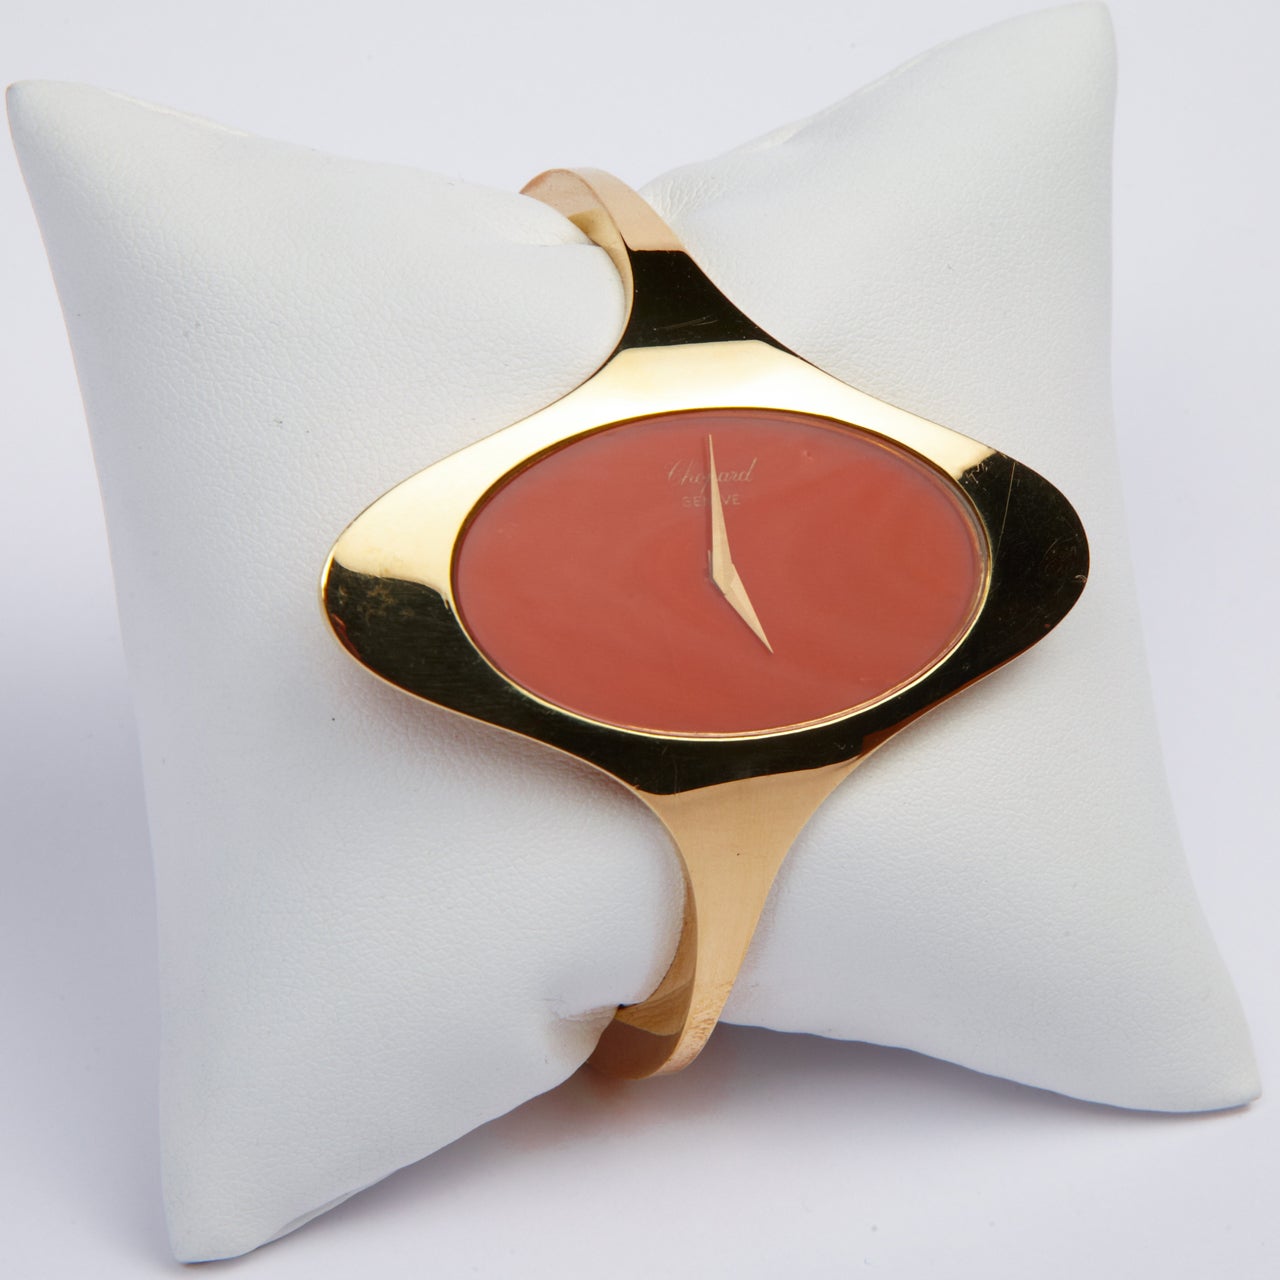 Chopard 18k yellow gold lady's bangle bracelet watch with coral dial.